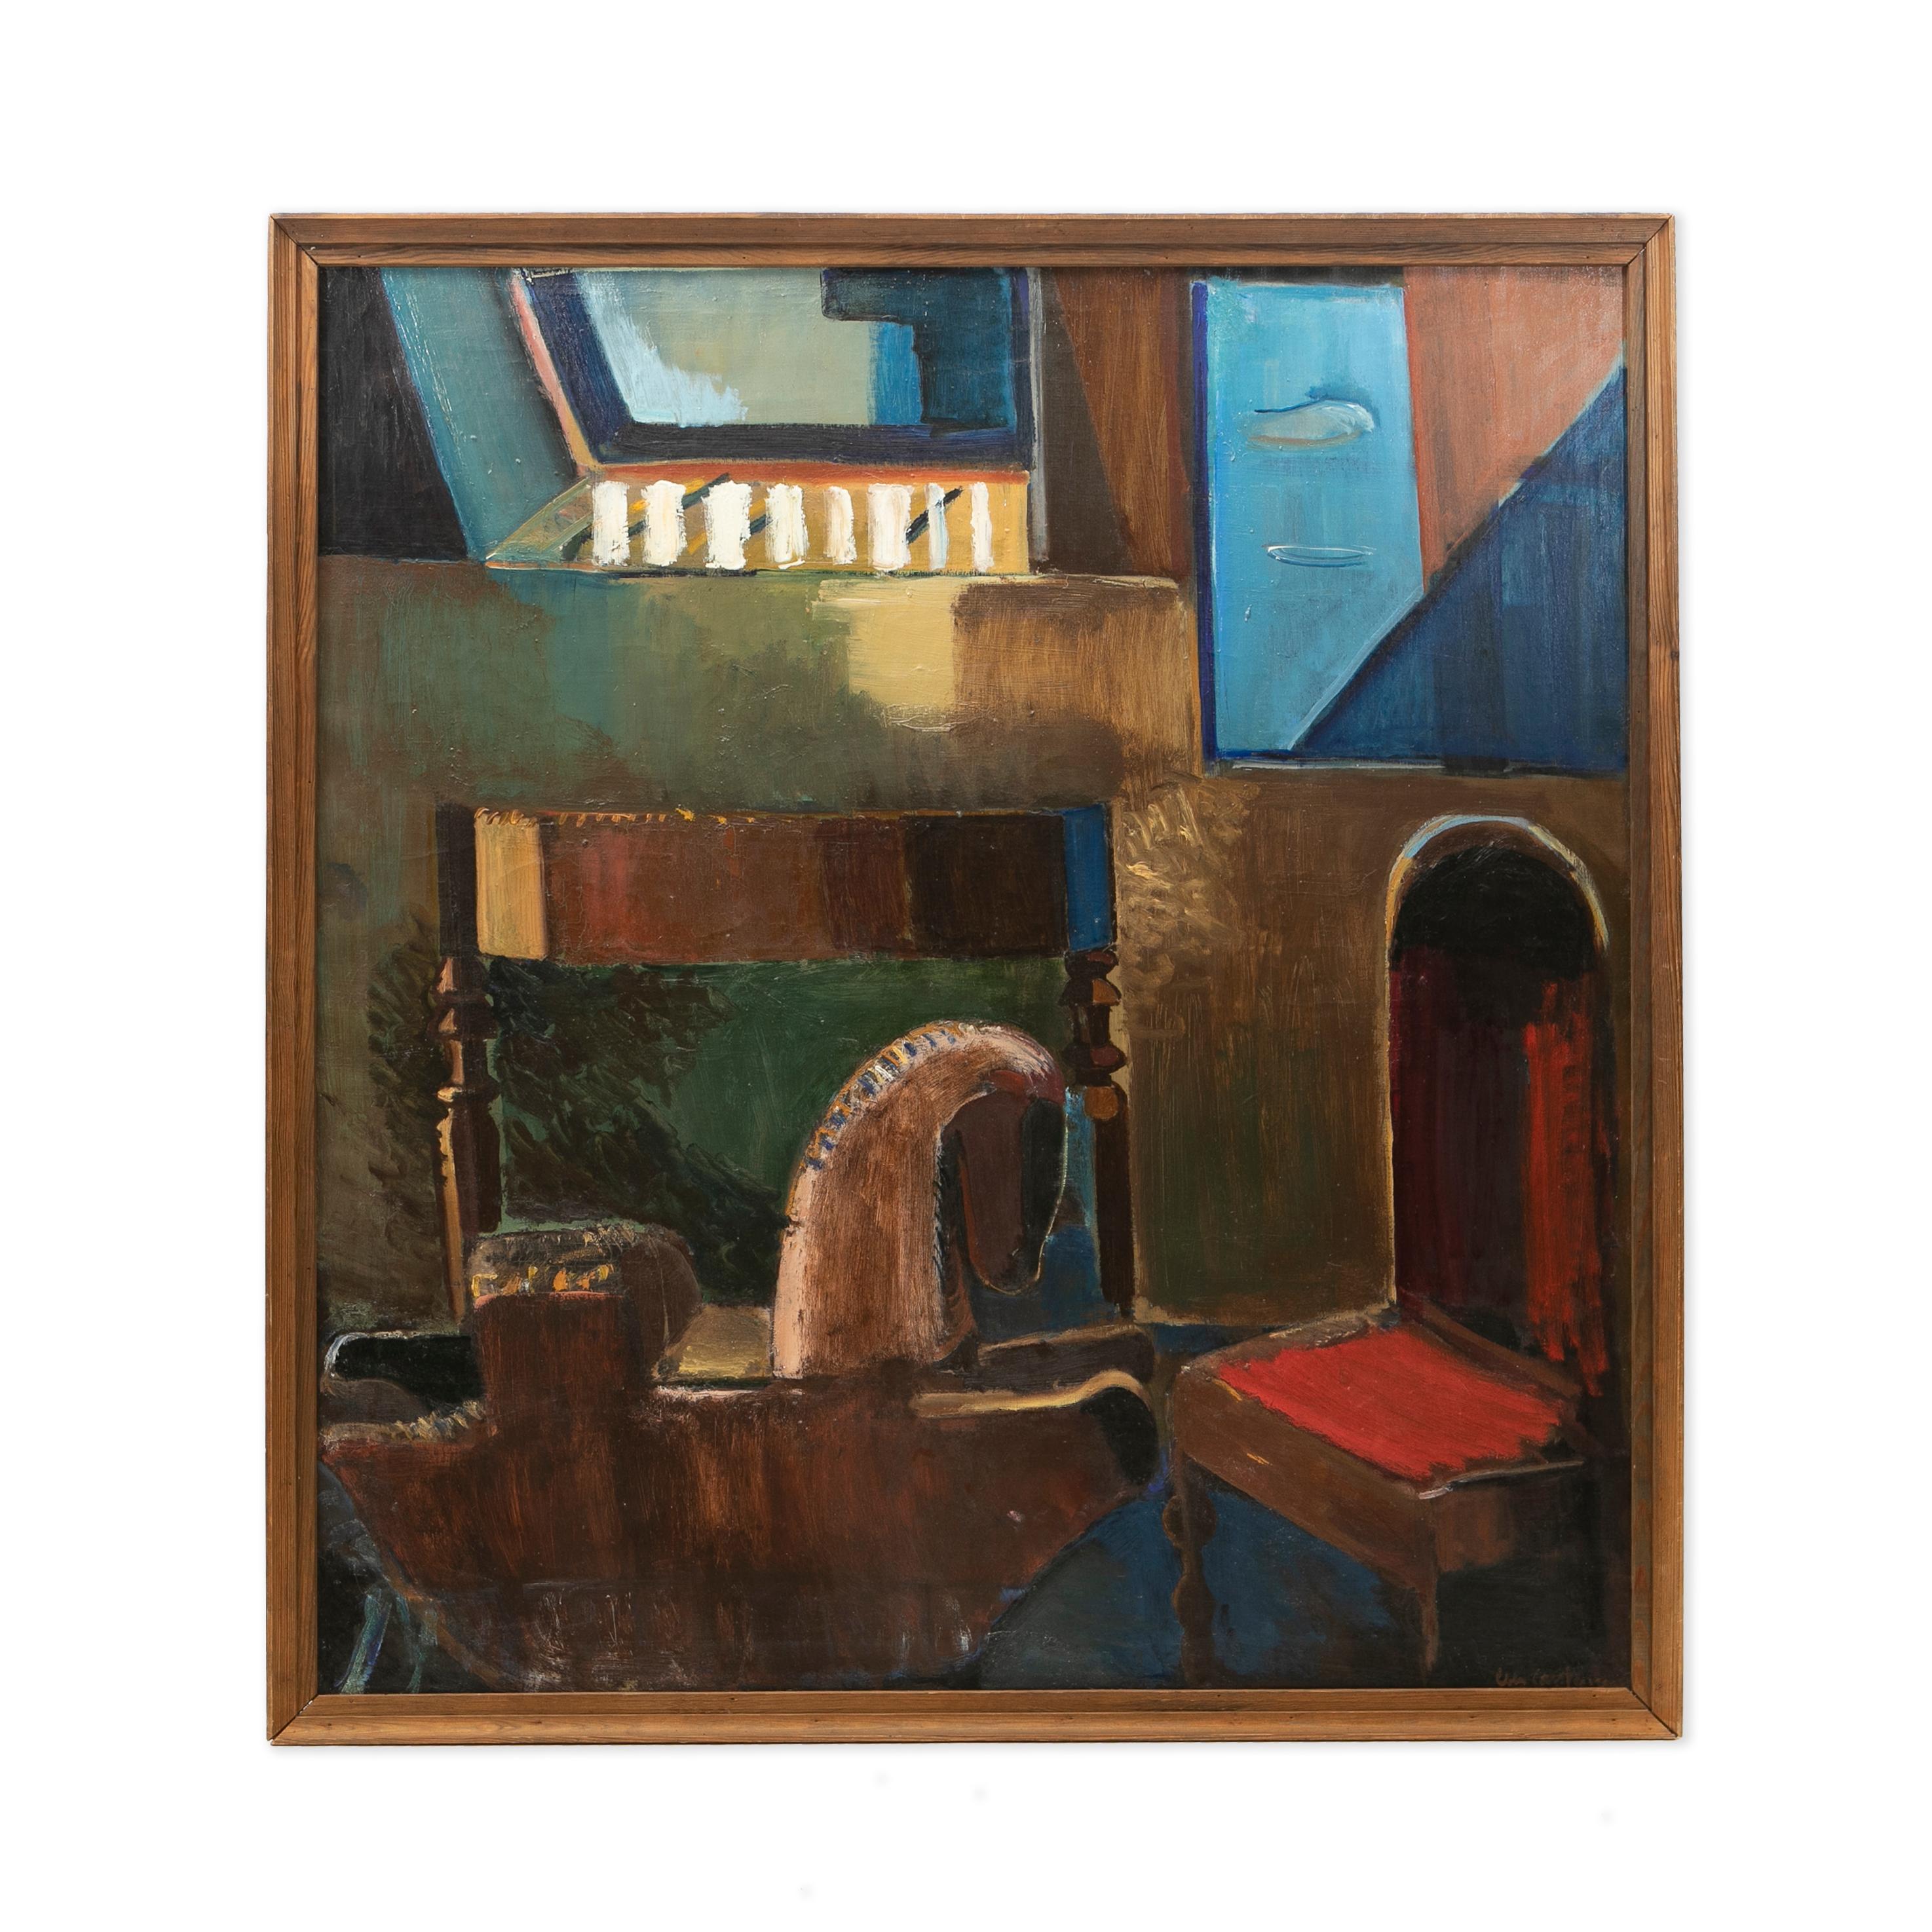 Ebba Carstensen, Danish 1885-1967

Cubist style painting of studio set-up, Denmark, c. 1920.

Oil painting on canvas, framed in pine wood frame.
Canvas size: 122 x 114 cm / 48 x 44,9 inch.
Signed: Ebba Carstensen.